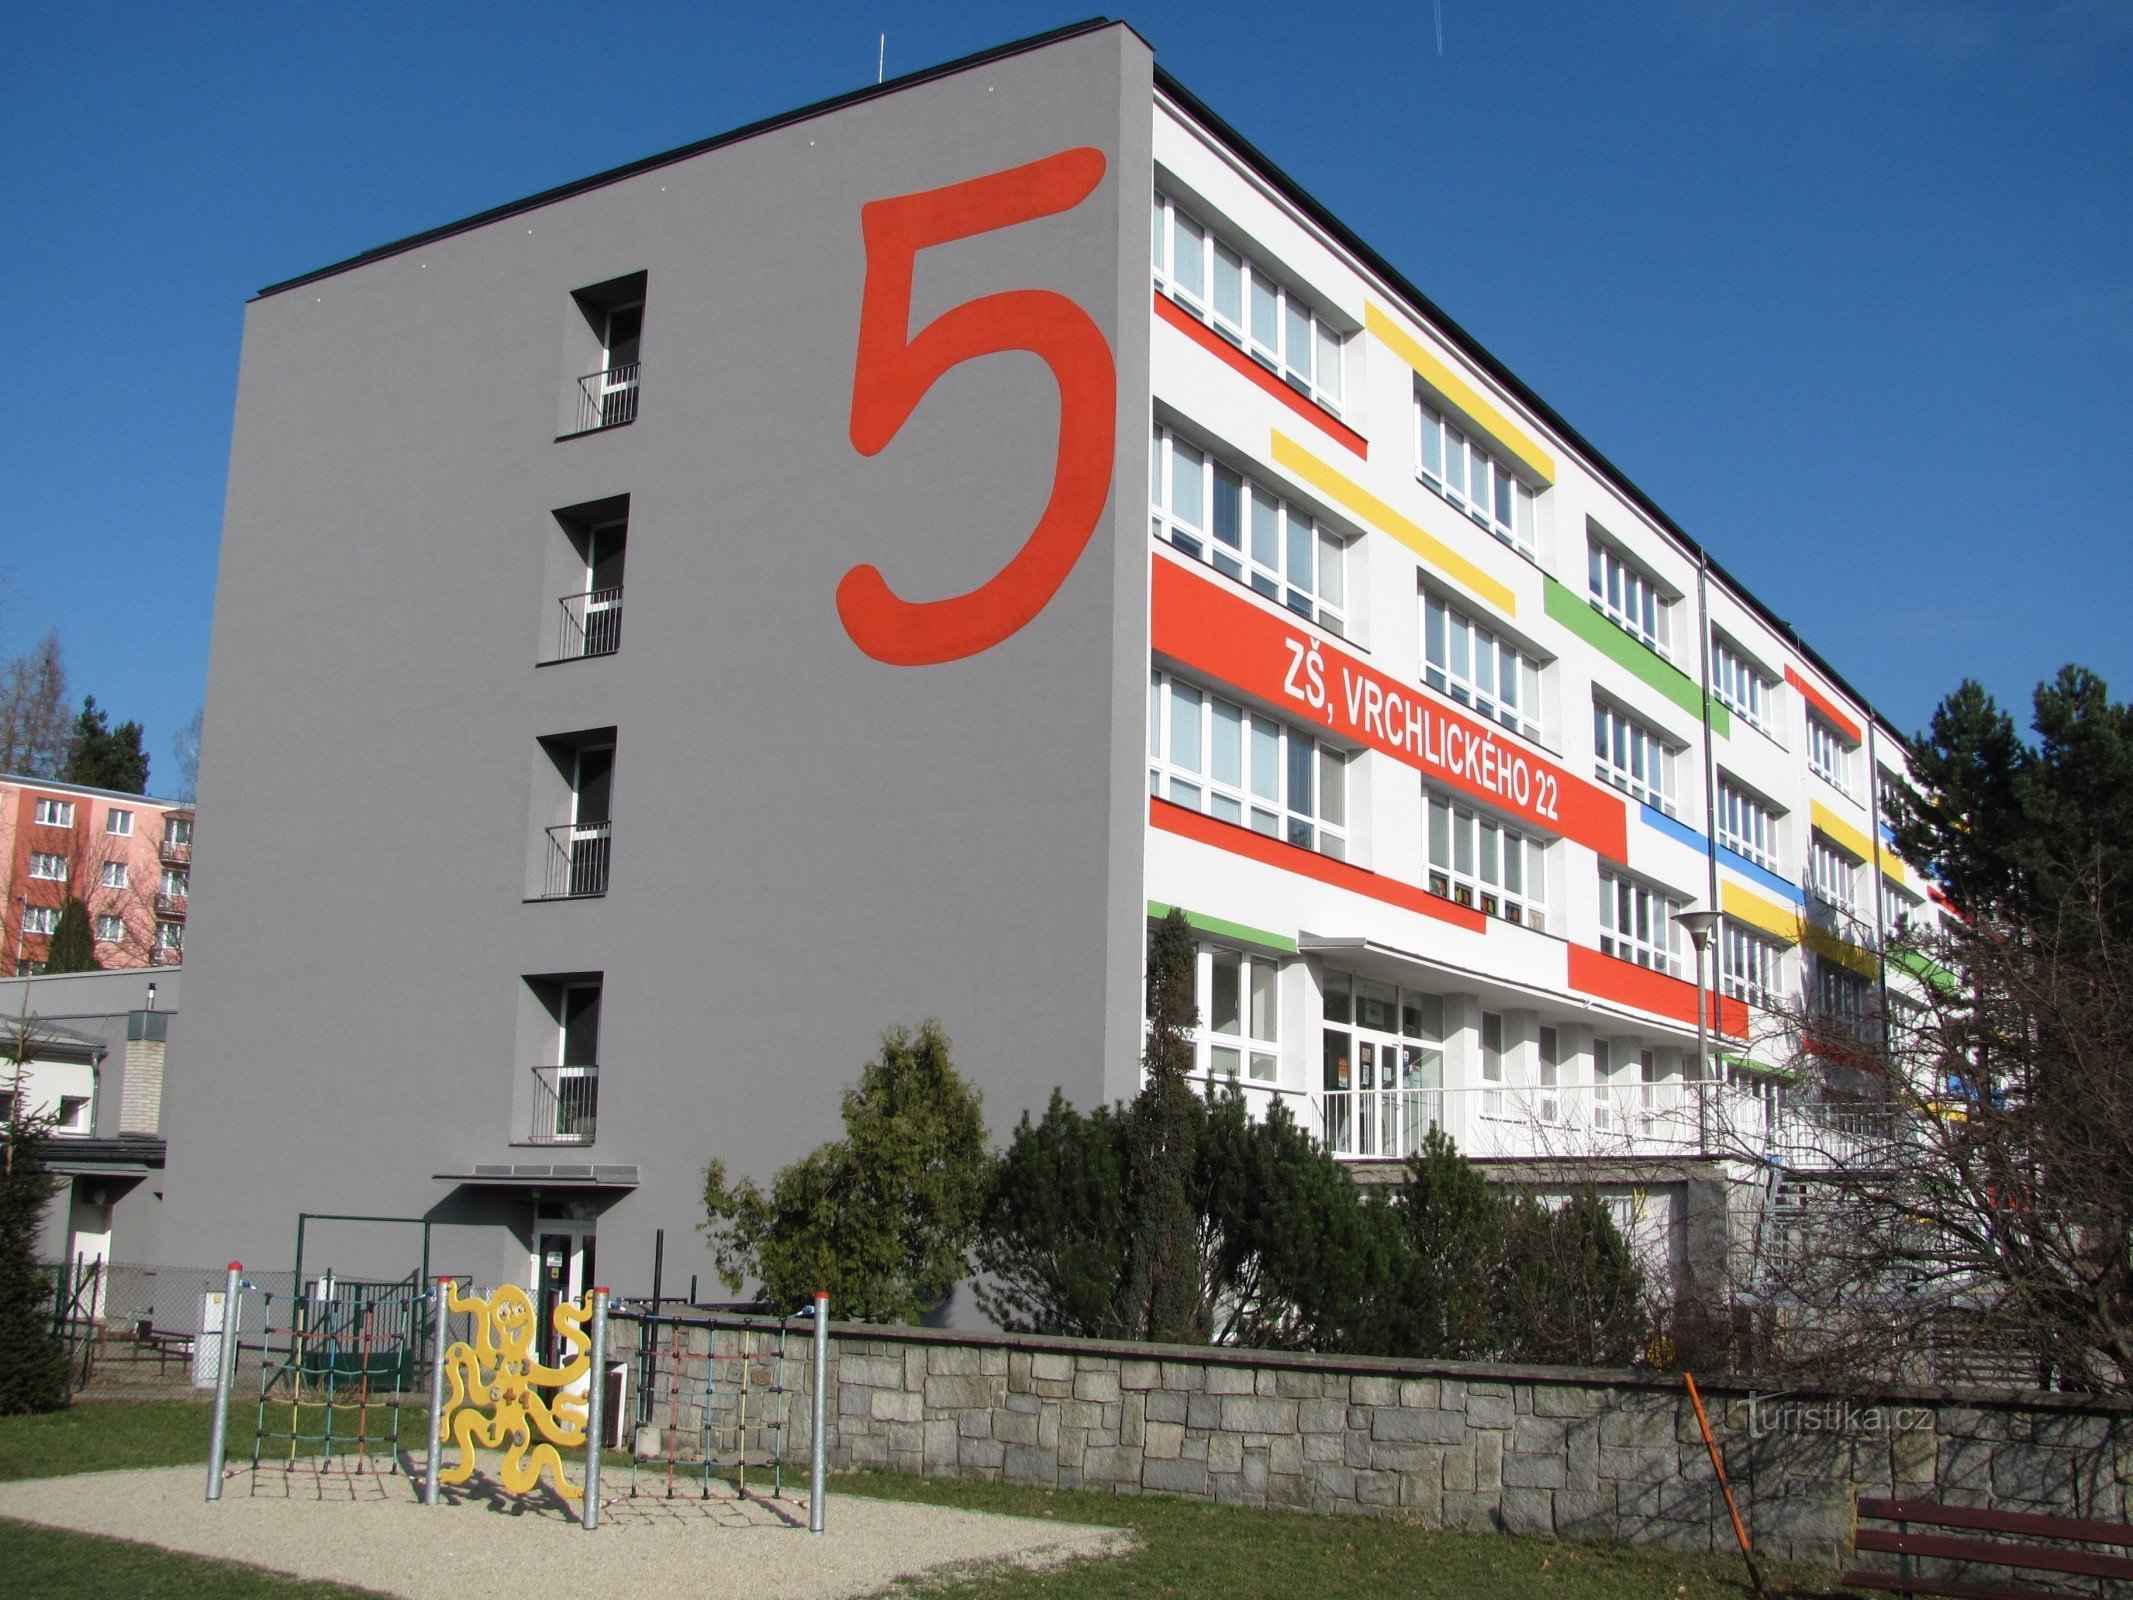 Šumperk – building of the 5th elementary school and children's 8D playground